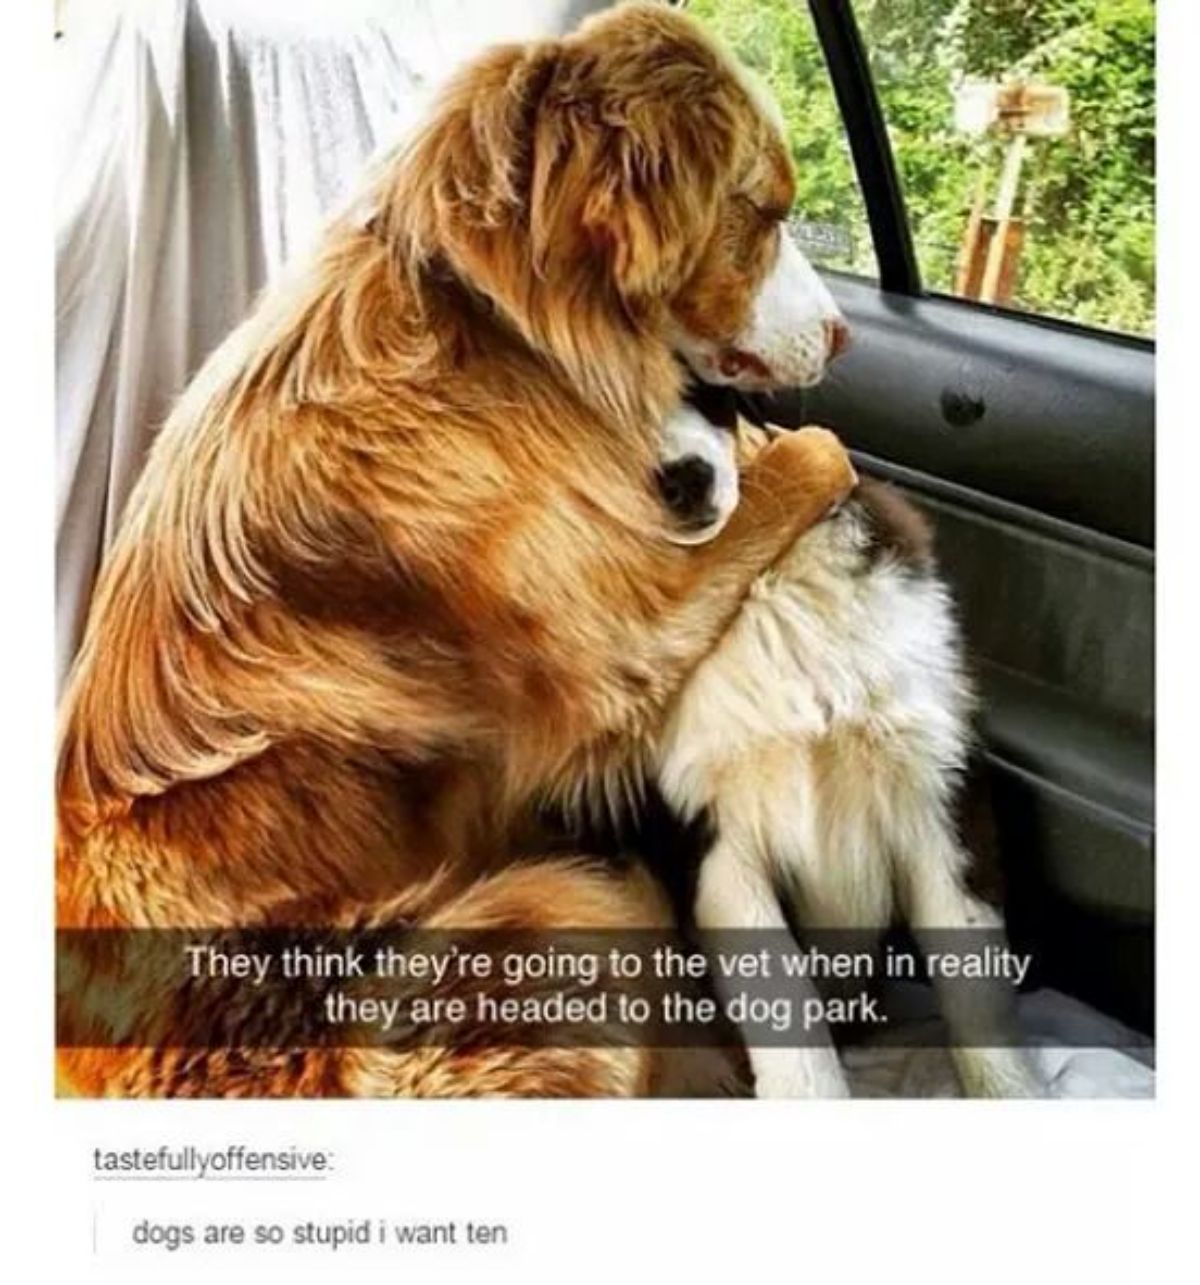 tumblr post of fluffy brown and white dog hugging another dog with caption saying they think they're going to vet but really it's the dog park